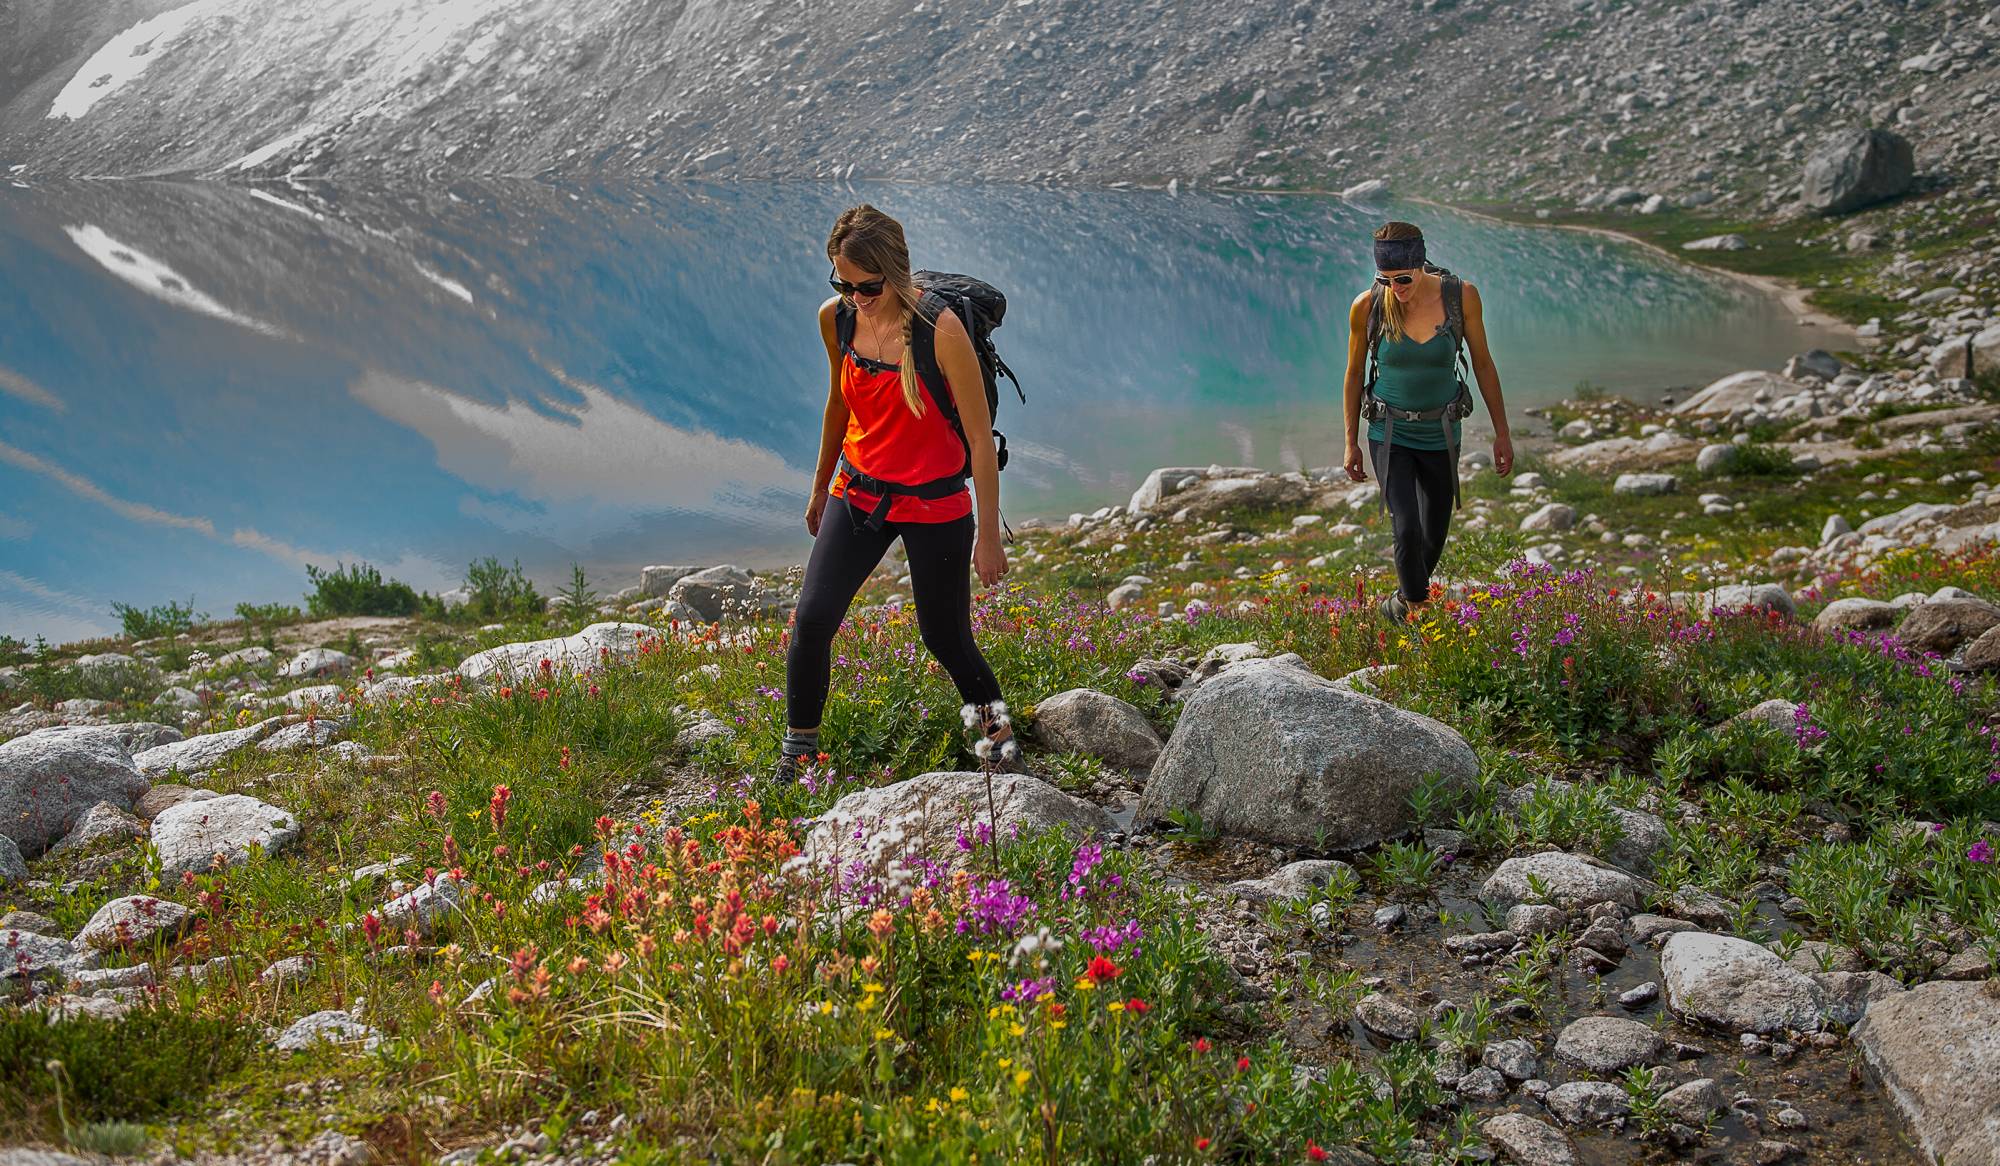 Summer Outdoor Adventure Vacations & Wilderness Hiking Tours. CMH